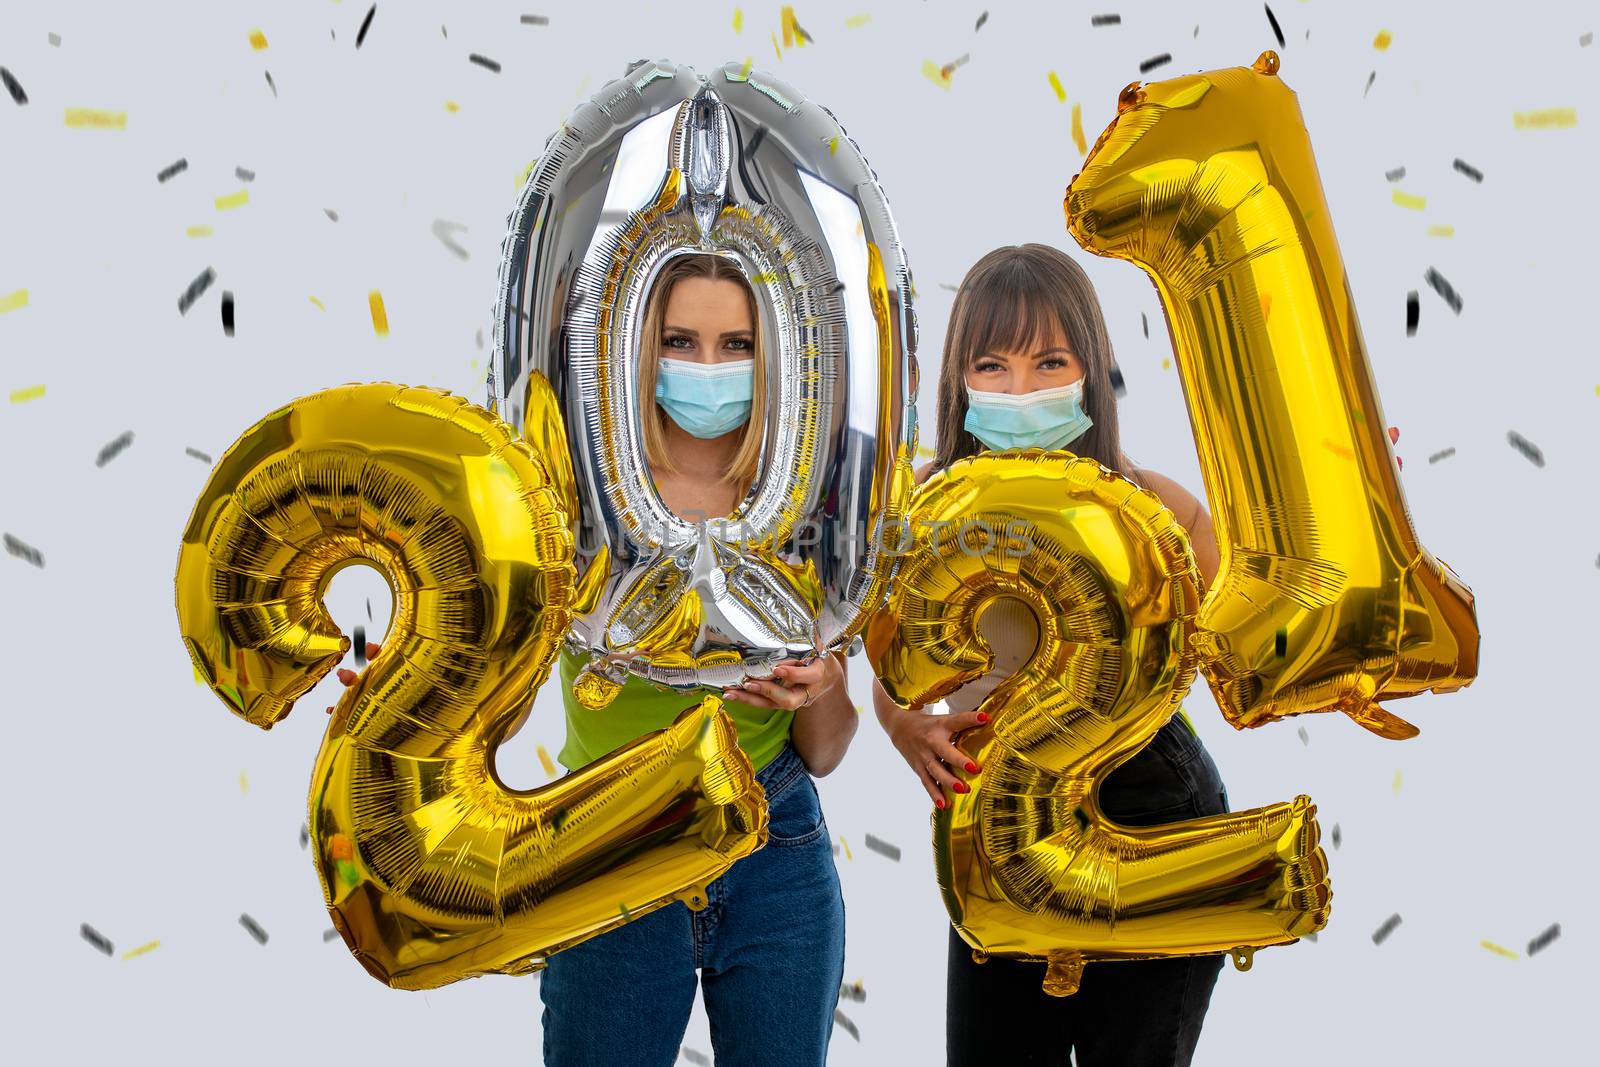 Girls celebrate the New Year 2021 with face masks by adamr